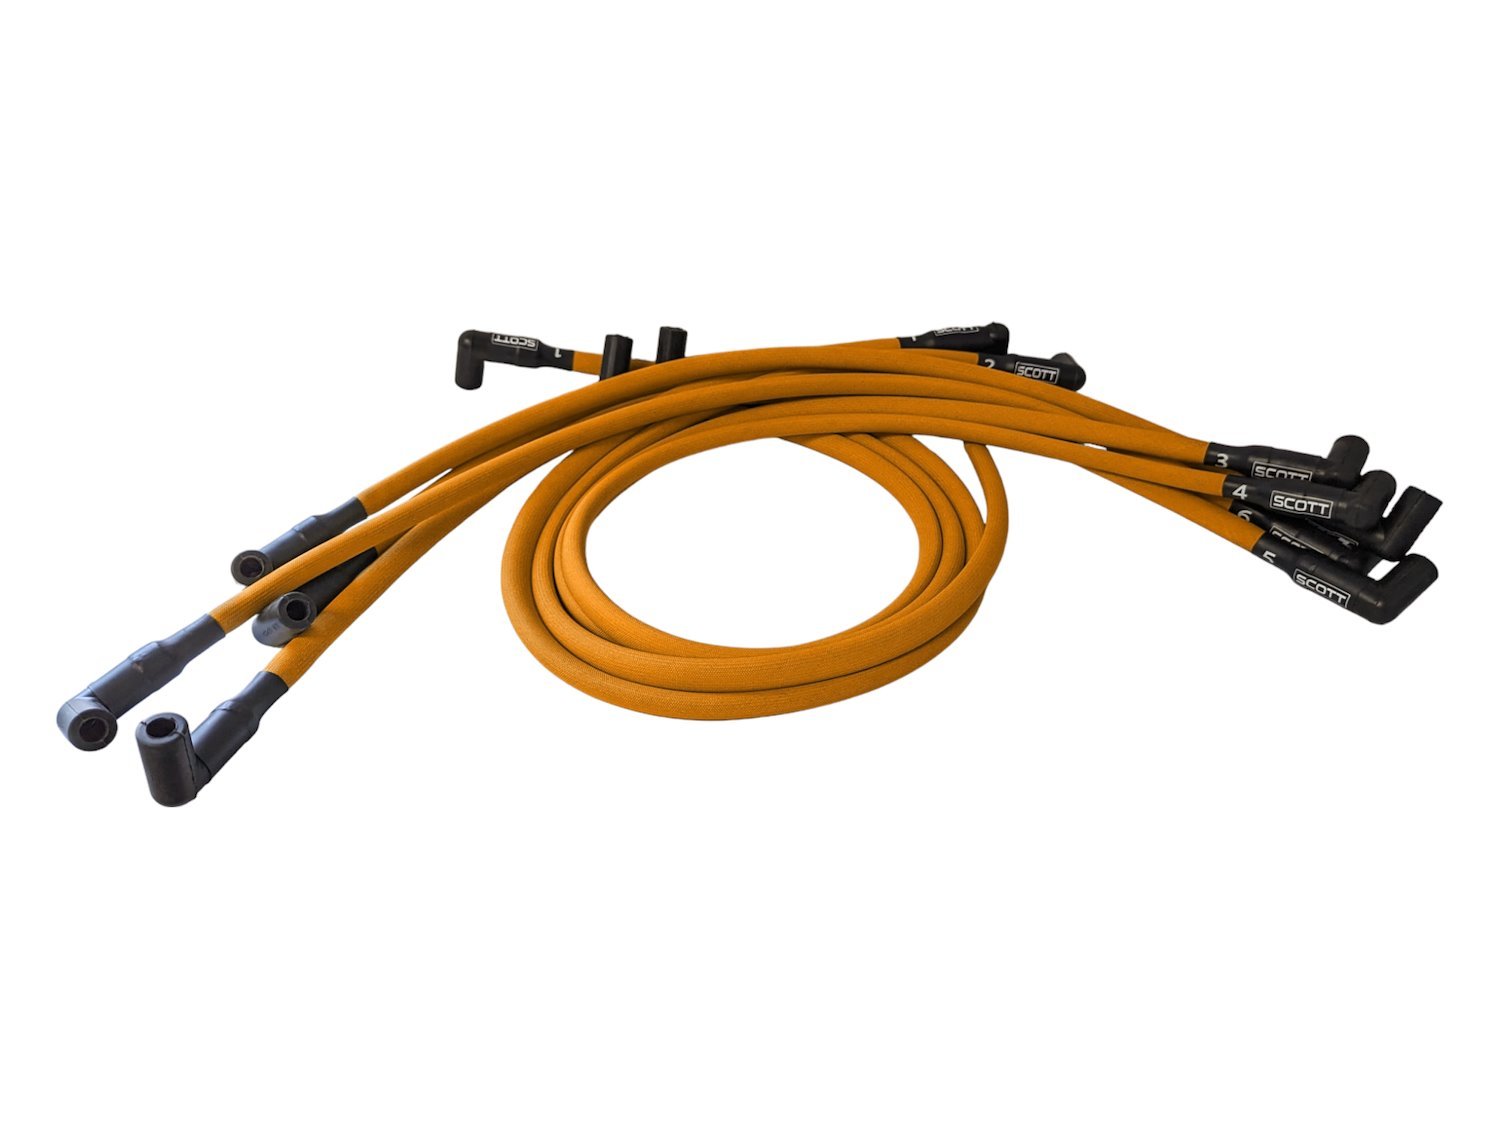 SPW300-PS-407-6 Super Mag Fiberglass-Oversleeved Spark Plug Wire Set for Small Block Chevy, Under Header [Orange]